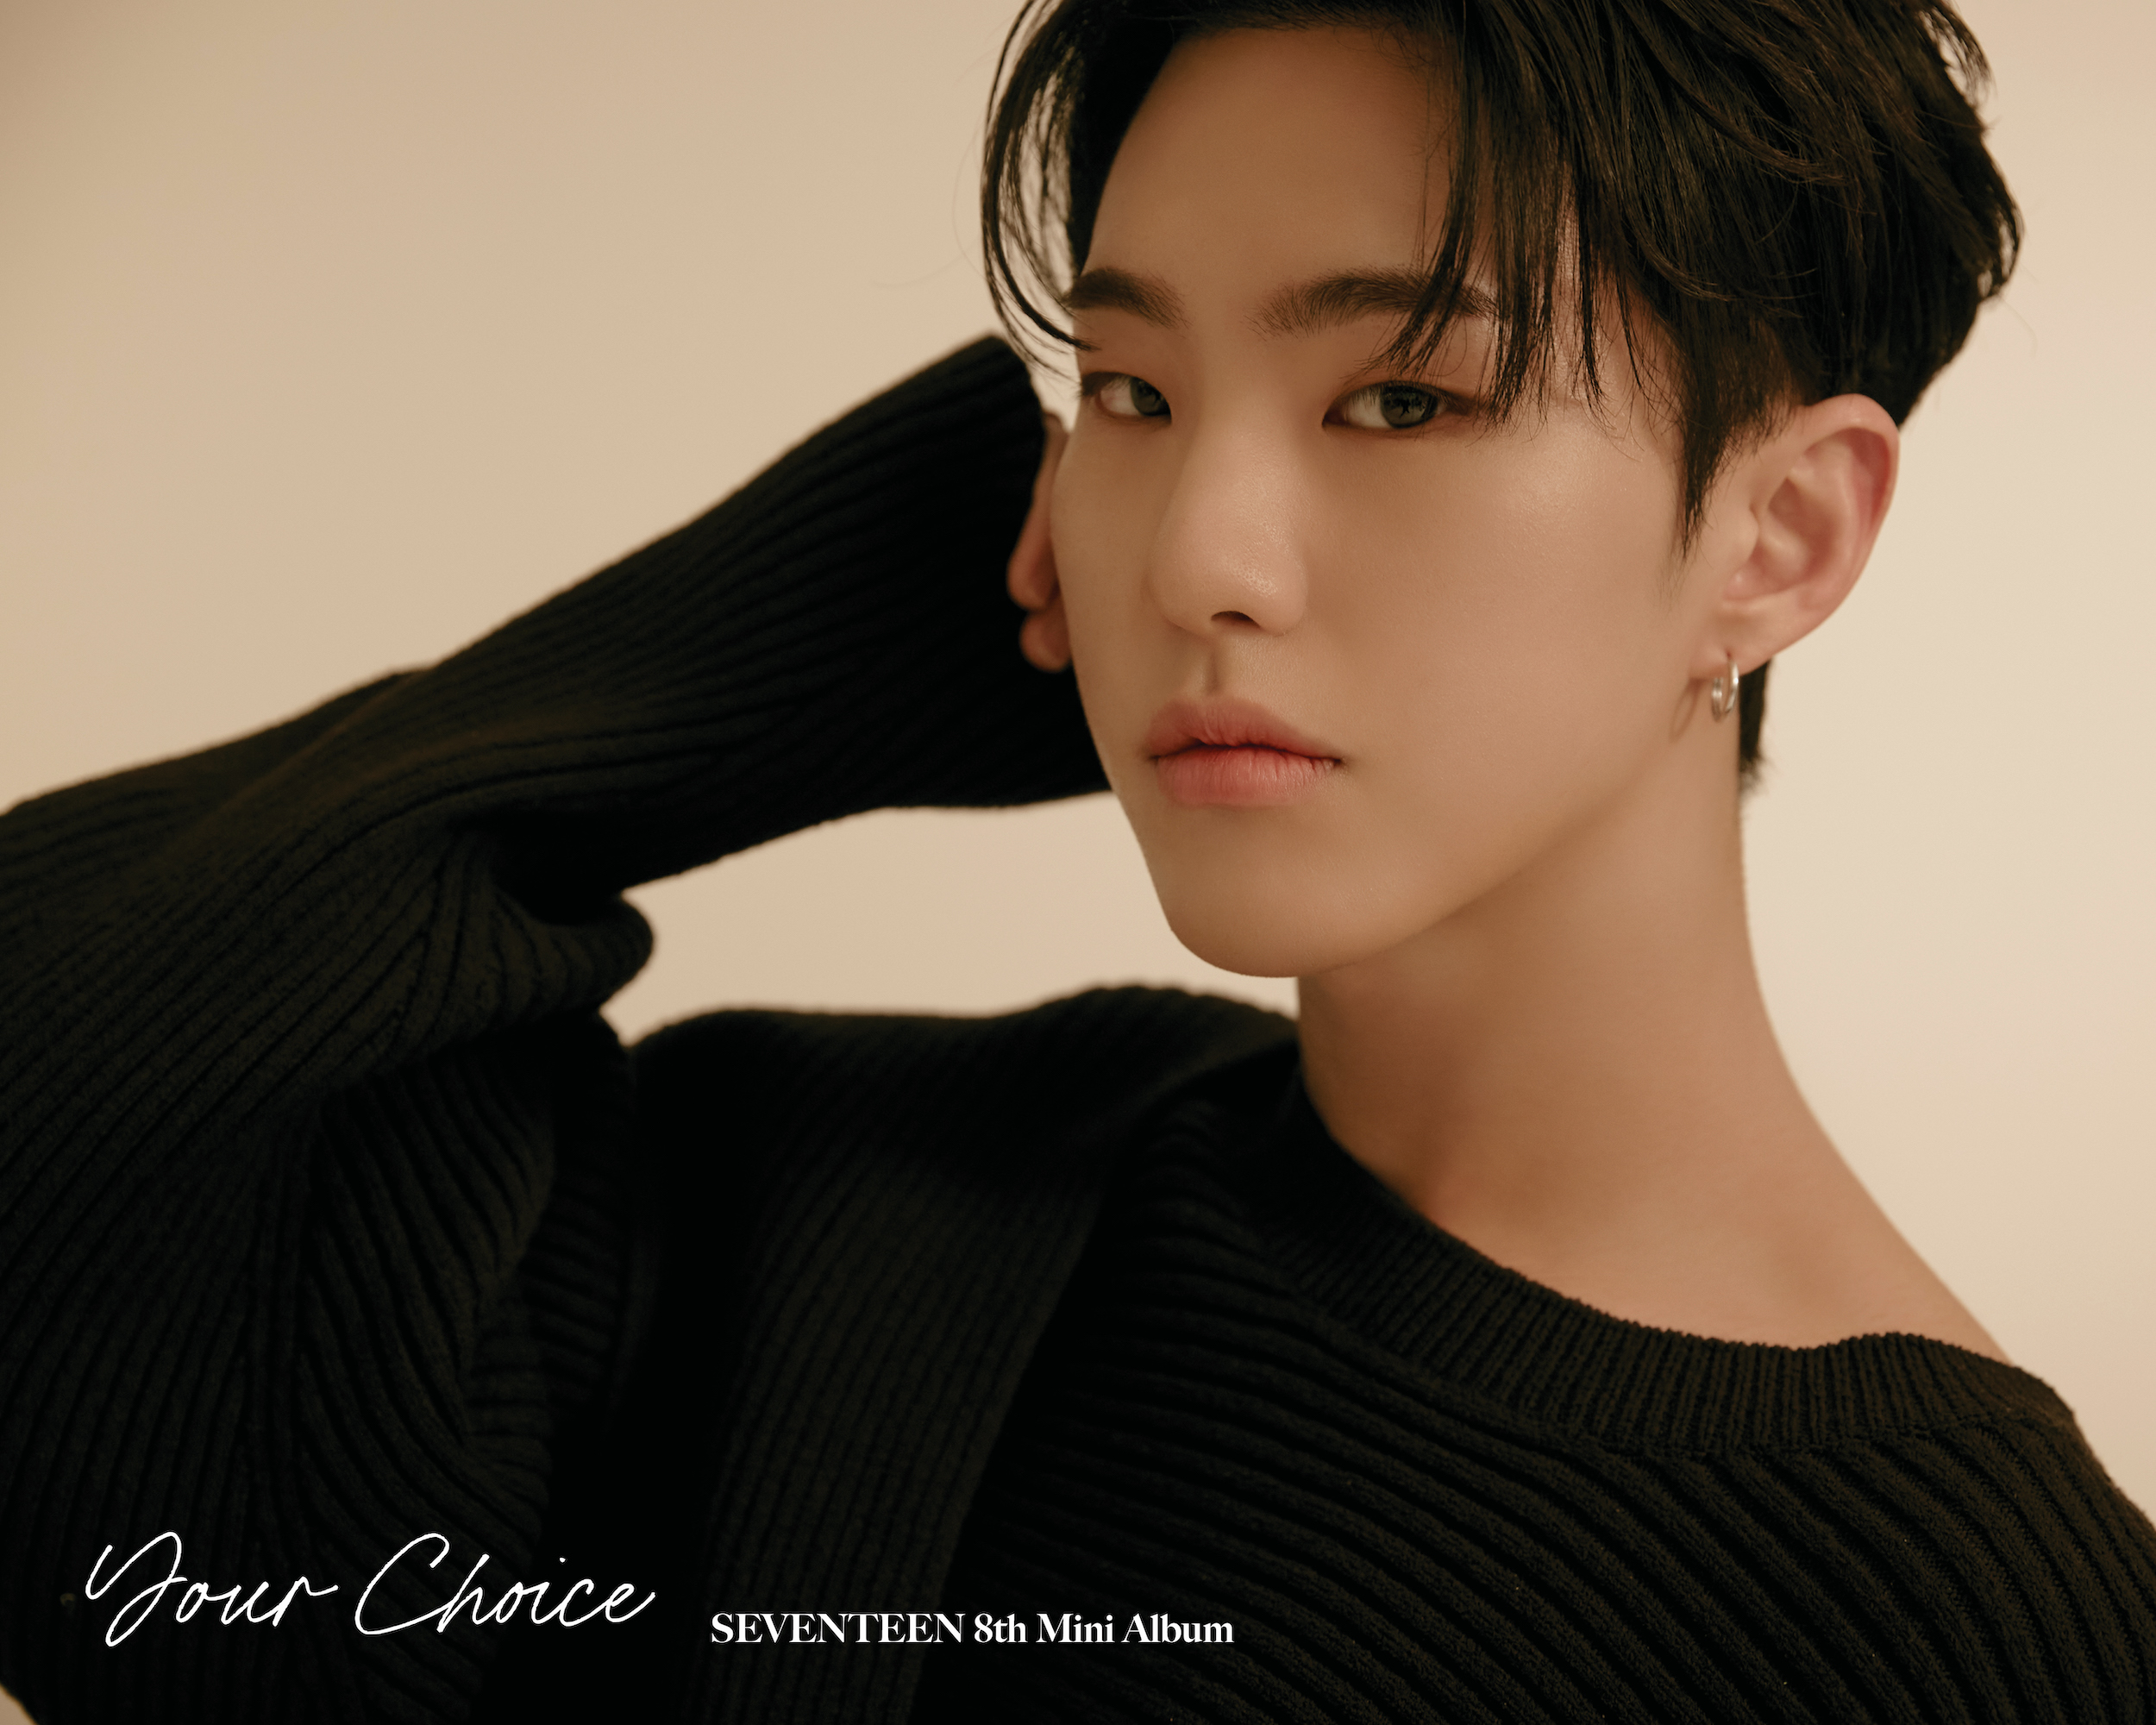 SEVENTEEN 8th Mini Album 'Your Choice' Official Photo OTHER SIDE 